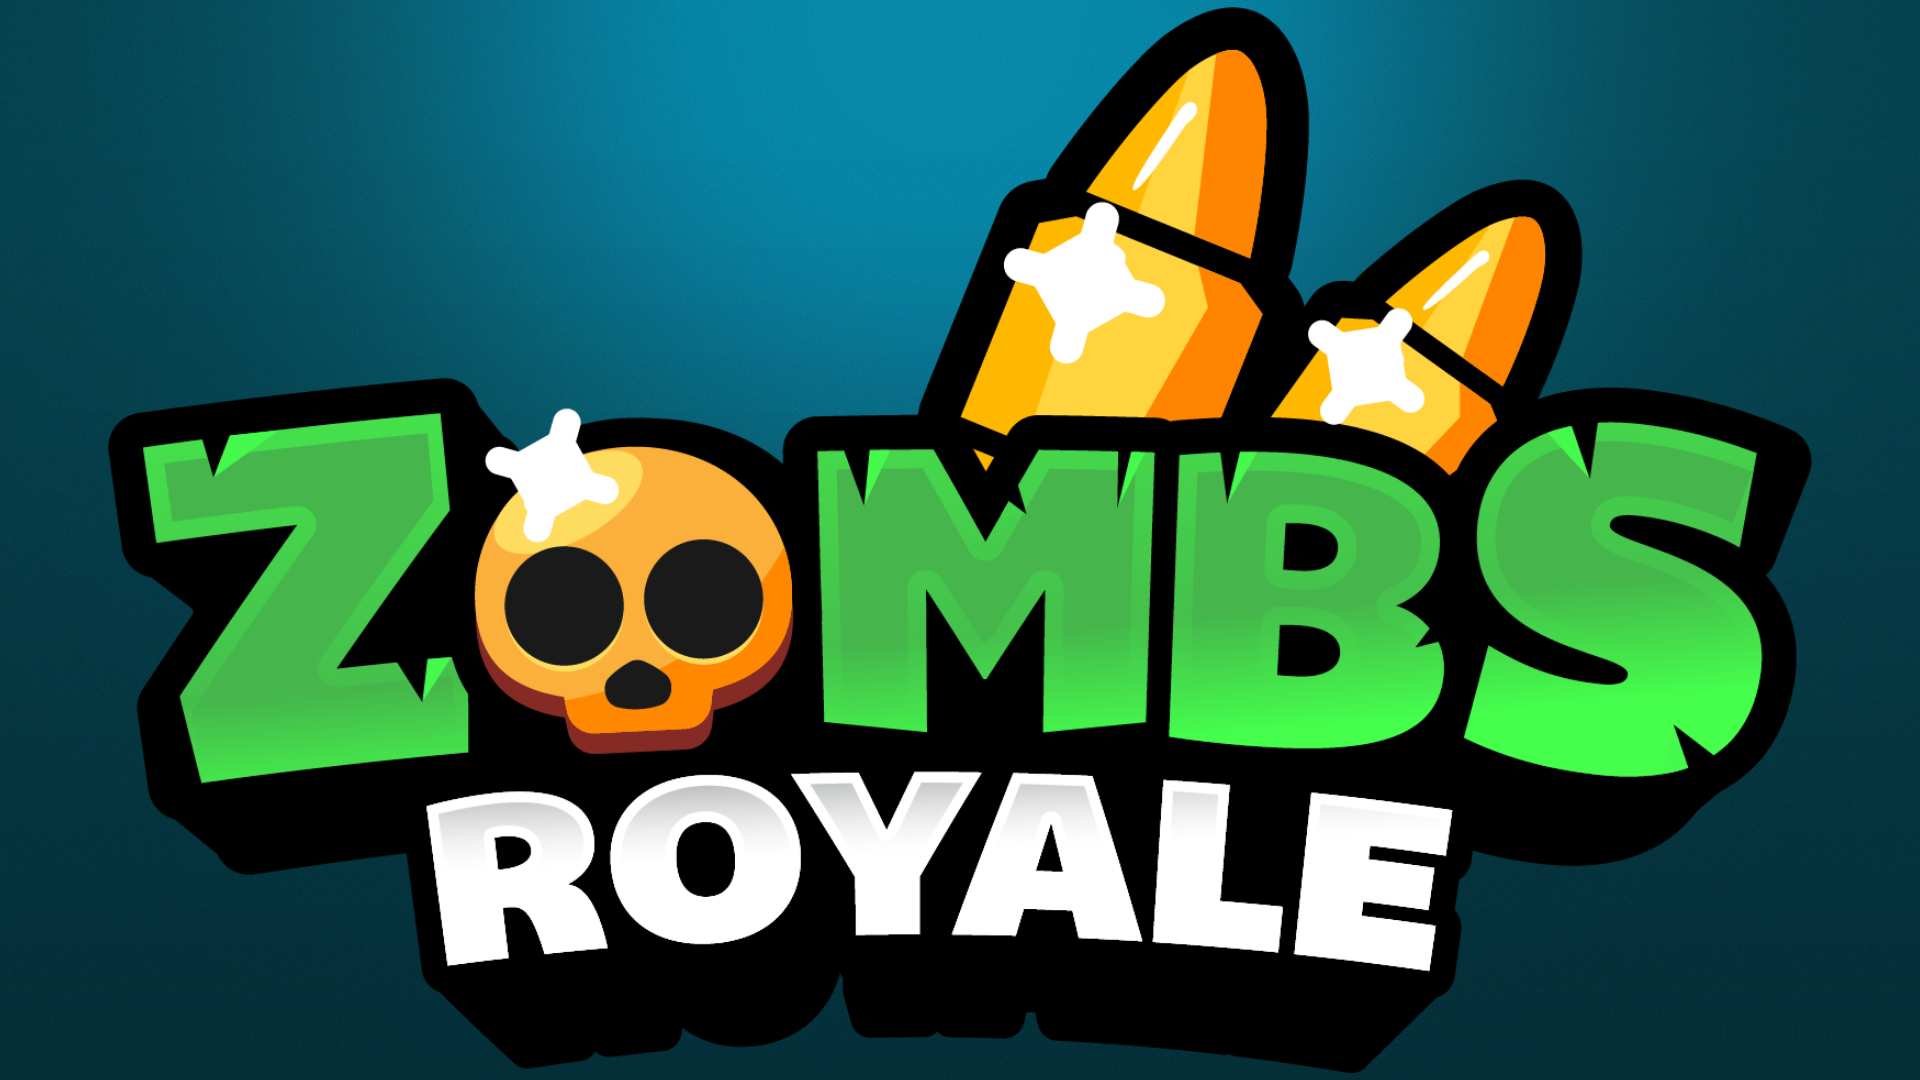 Video Game Zombs Royale HD Wallpaper | Background Image